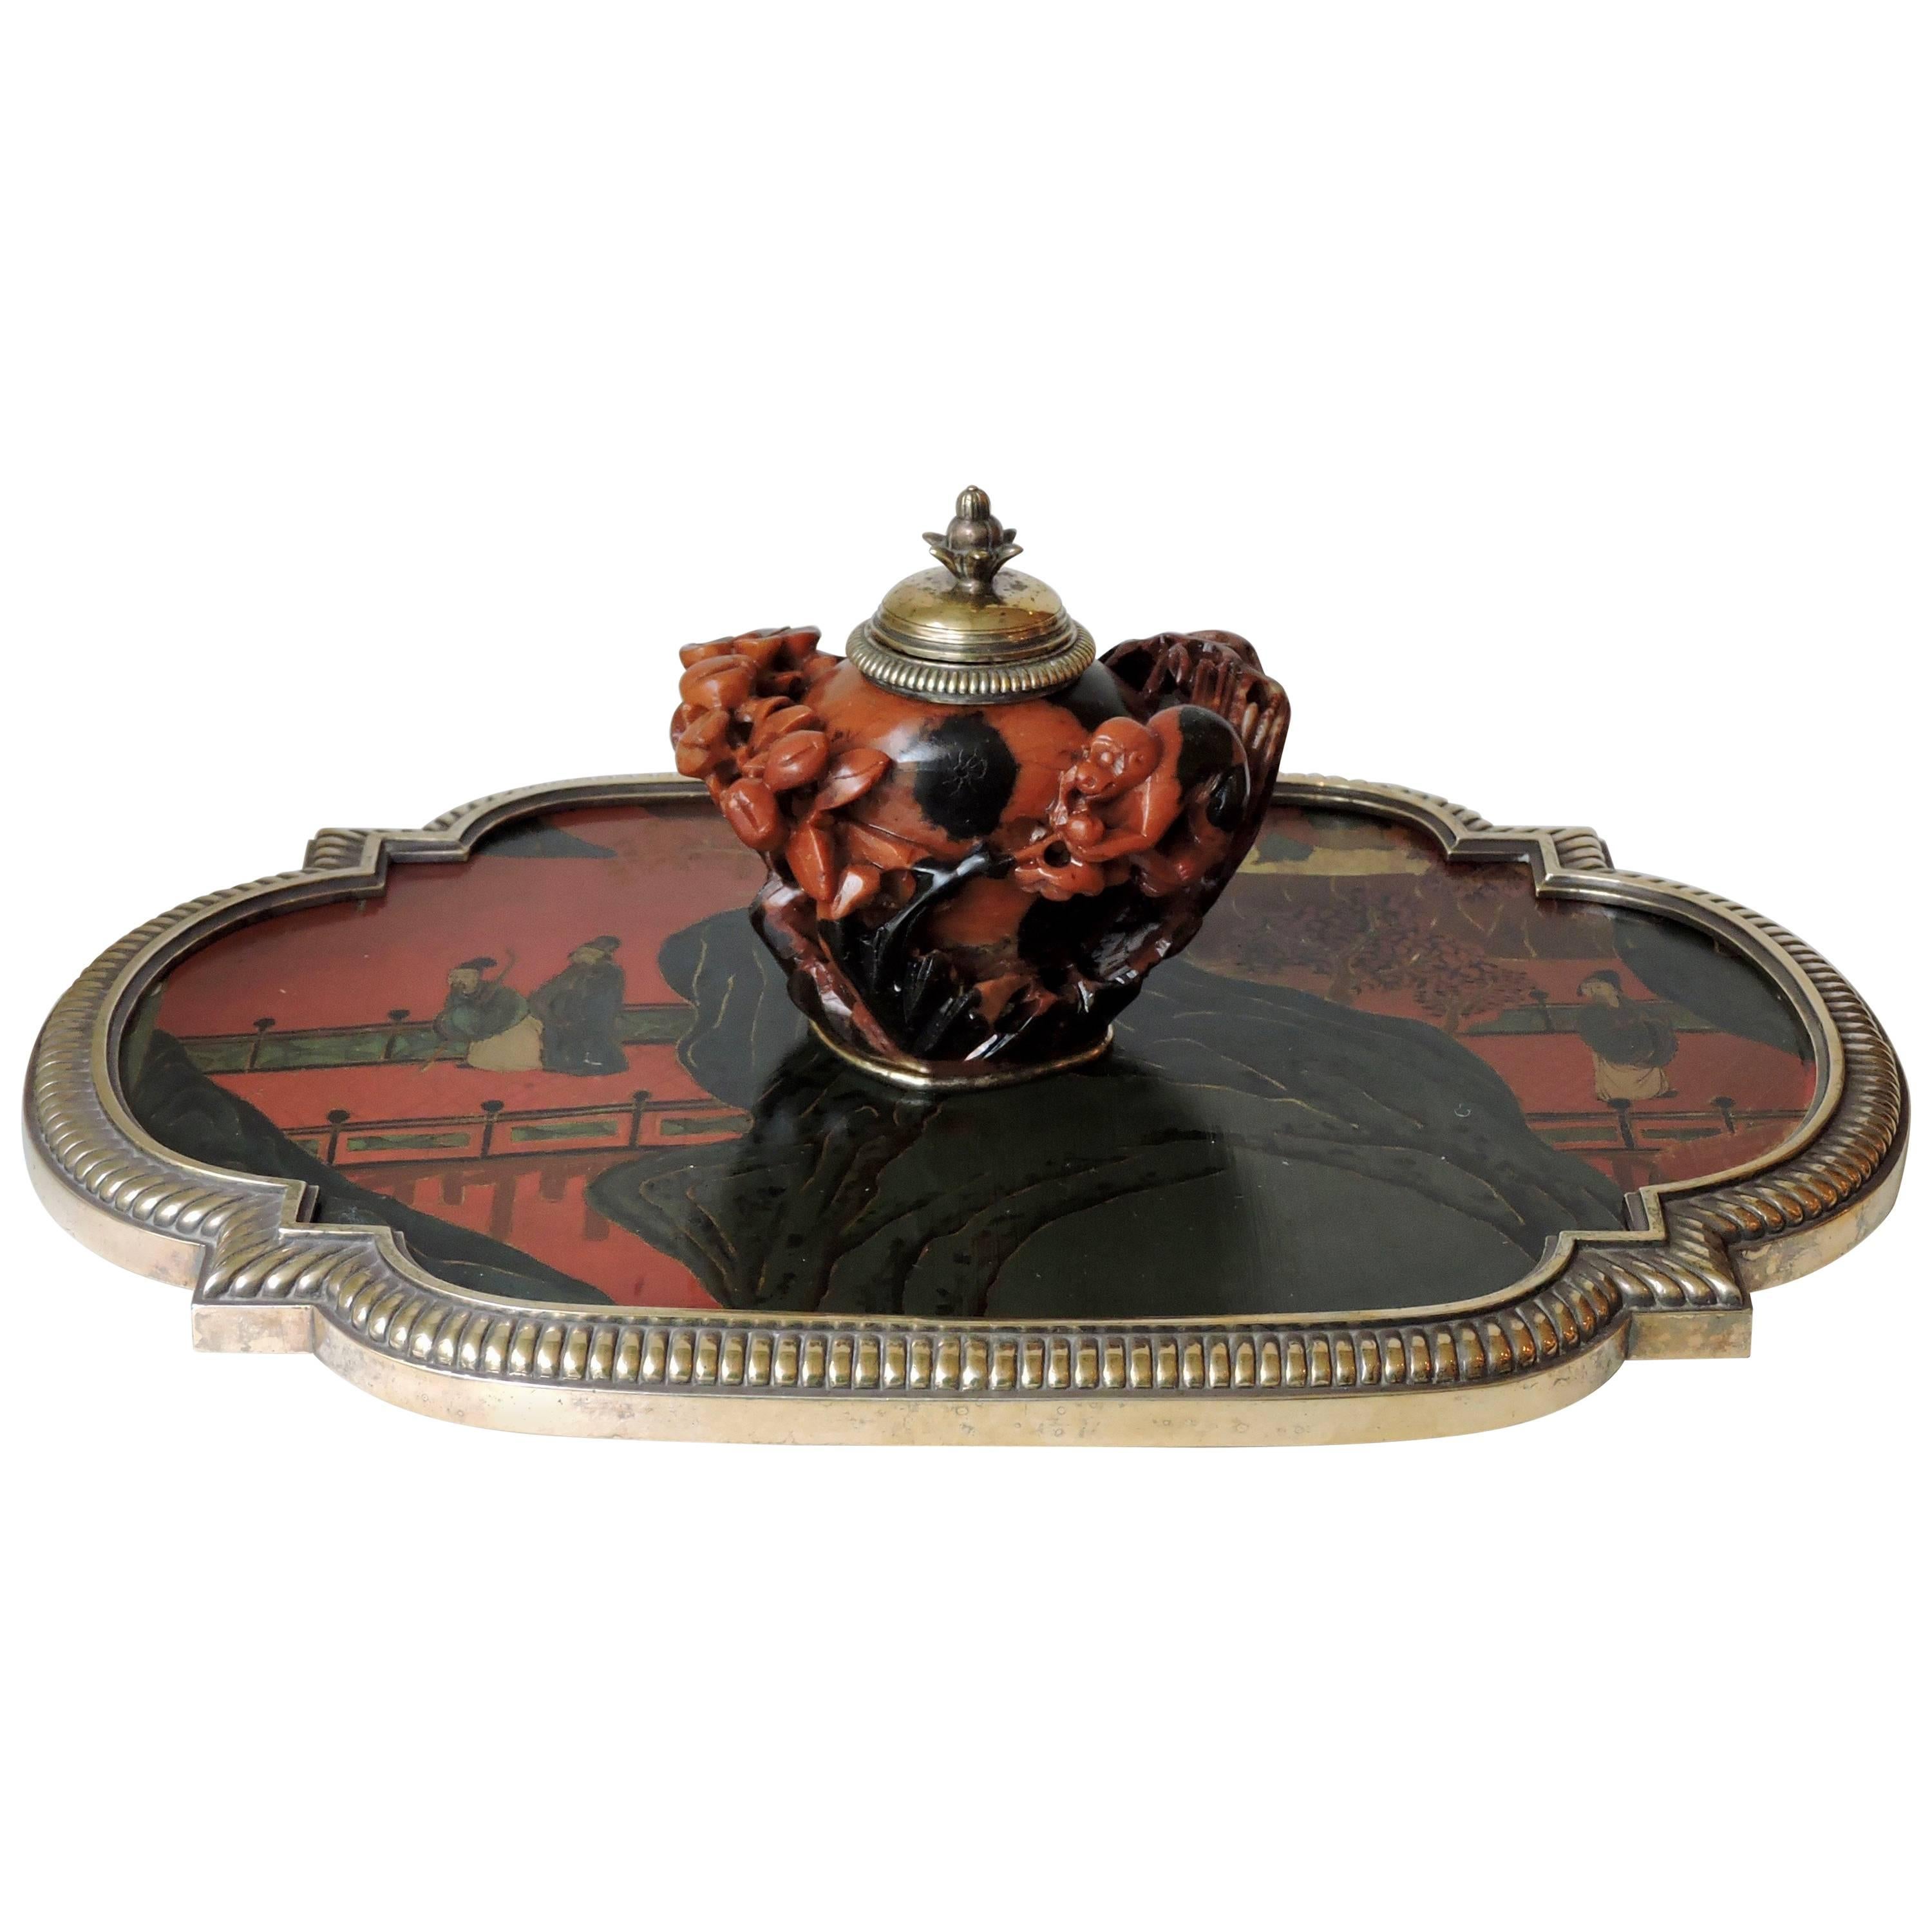 Open- worked carved monkey design soapstone inkwell (steatite)
Resting on a red and gold china lacquer tray designed with characters on a bridge.
Mount of tray and inkwell bronze godrons
Signed Boin-Taburet in Paris and Numbered 78878 53,
circa